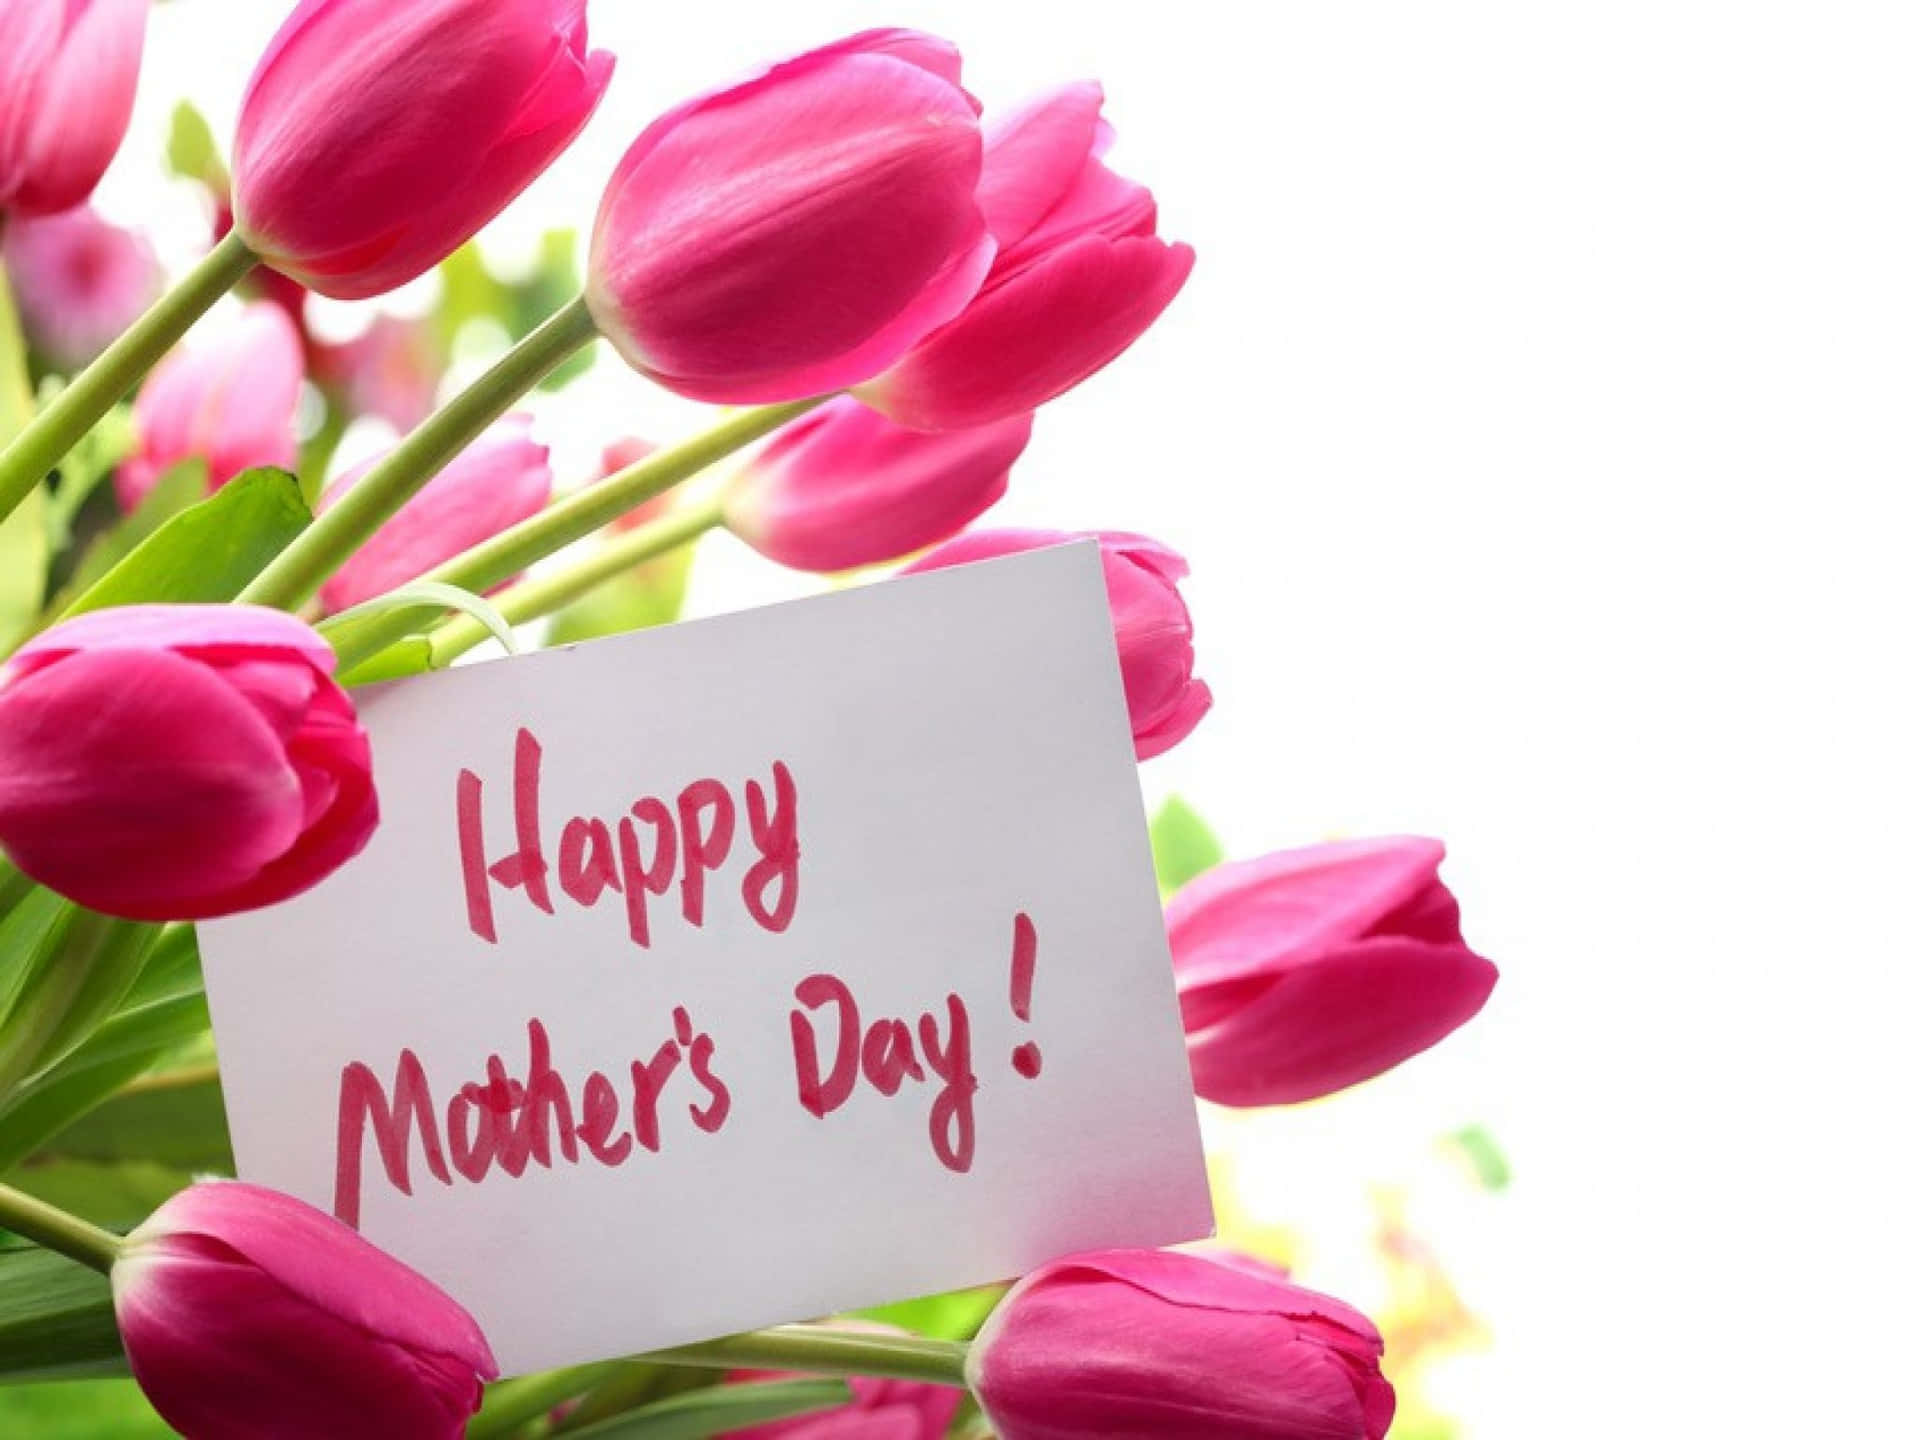 Give mom the appreciation she deserves this Mother's Day